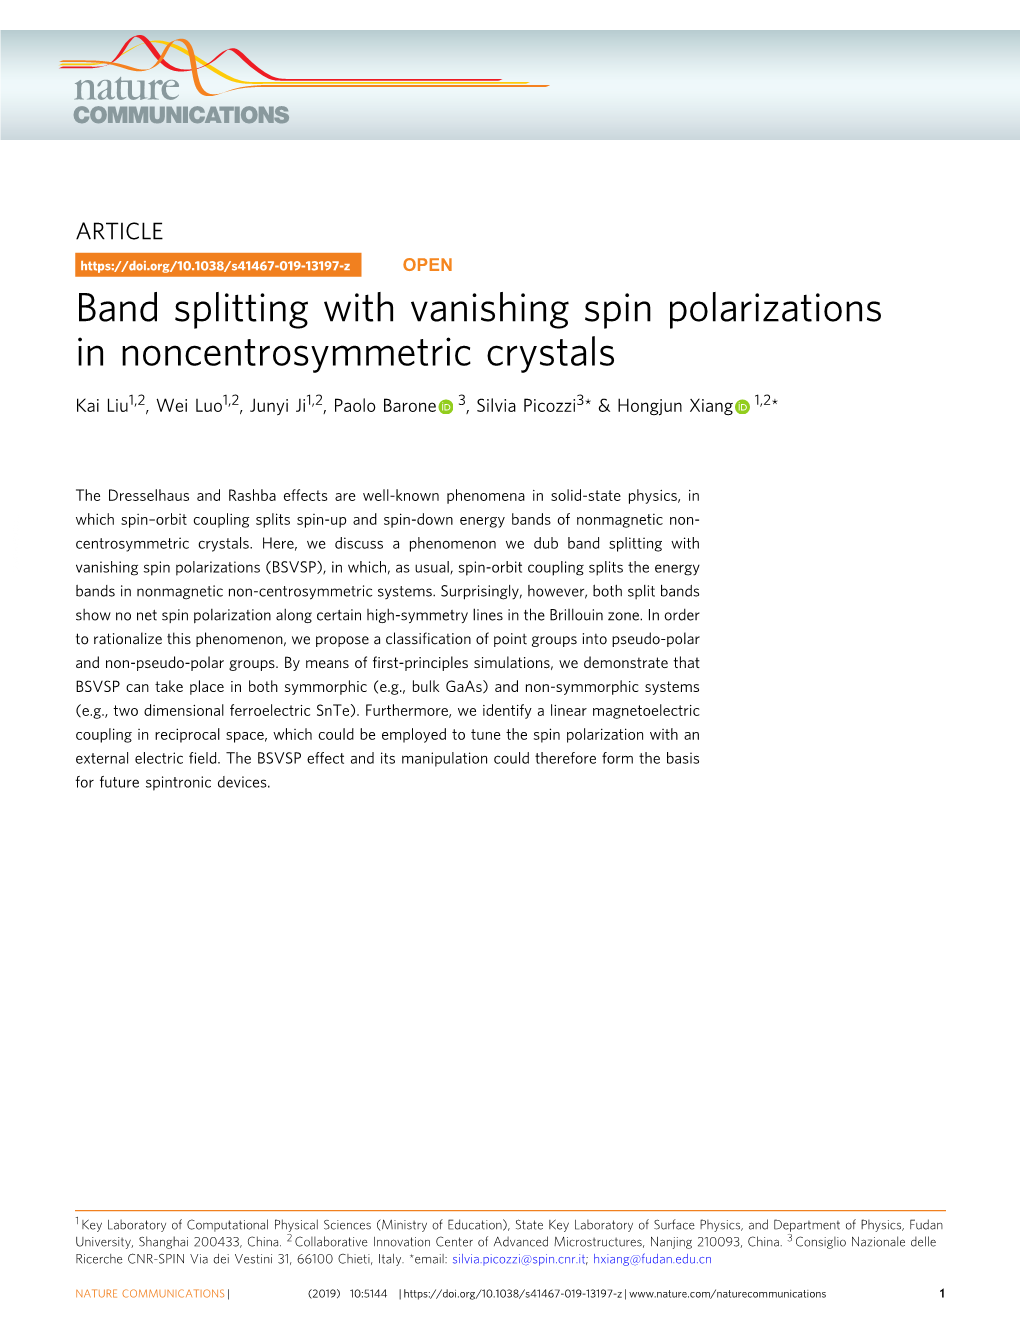 Band Splitting with Vanishing Spin Polarizations in Noncentrosymmetric Crystals